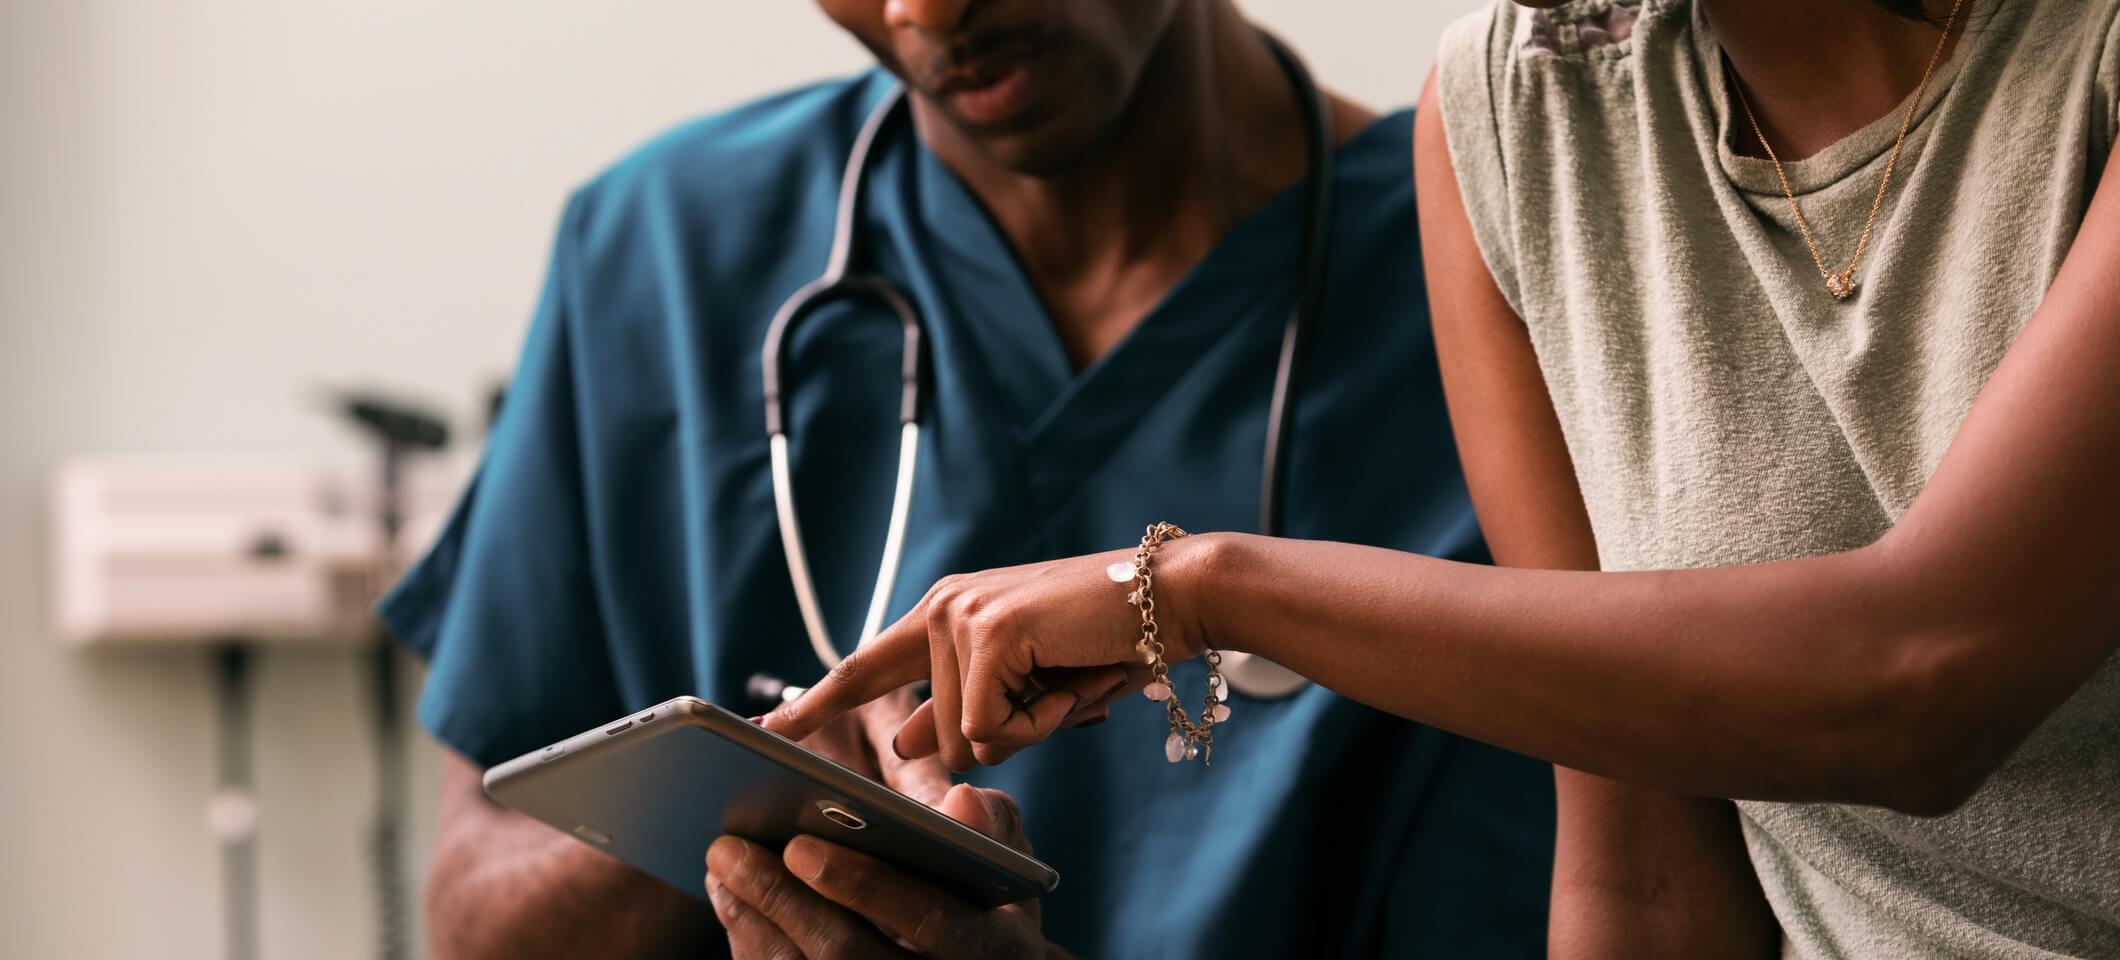 image of patient pointing to tablet screen next to doctor